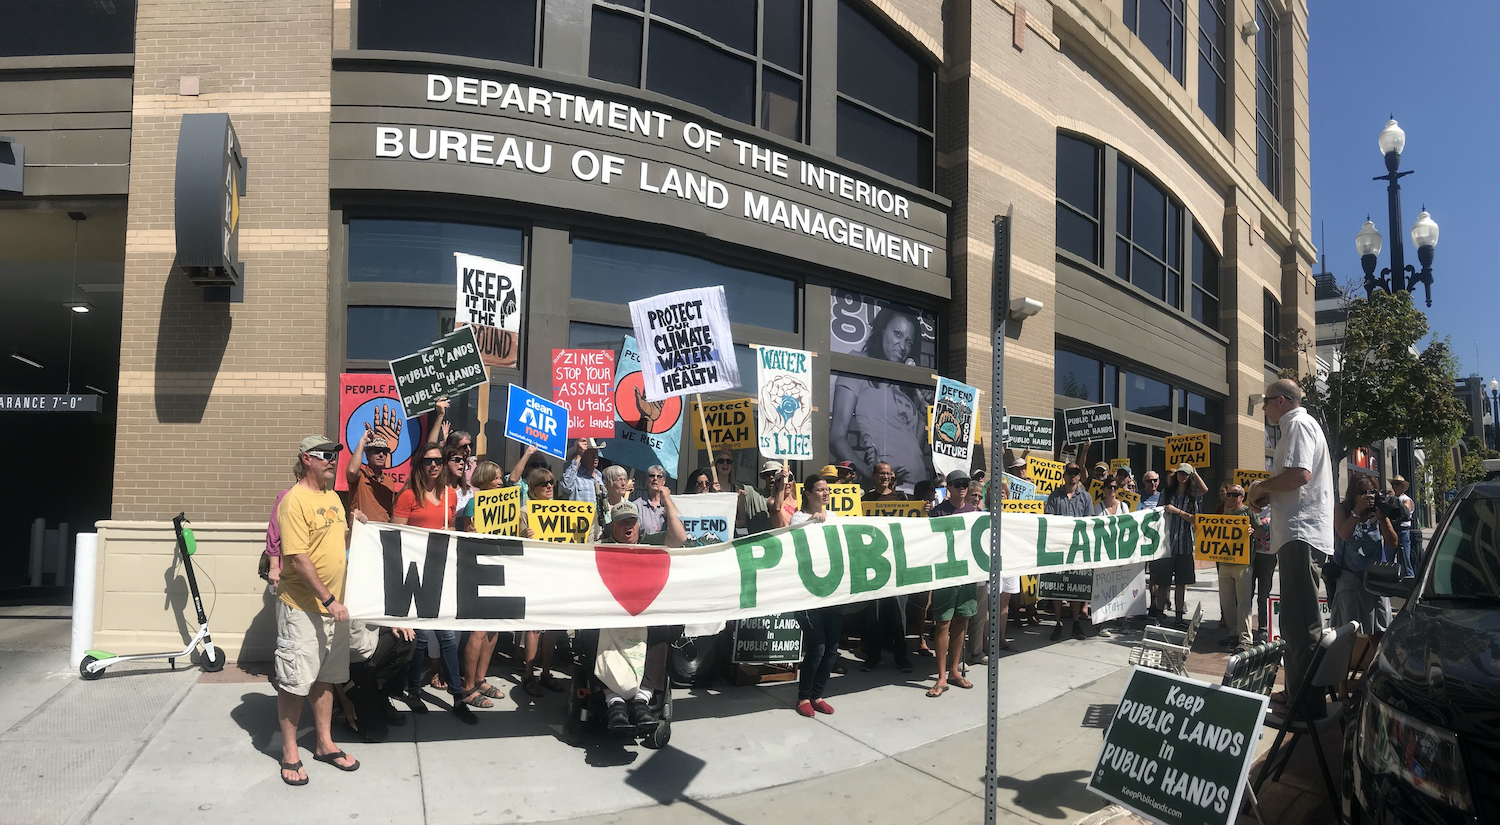 Activists protest to protect public lands